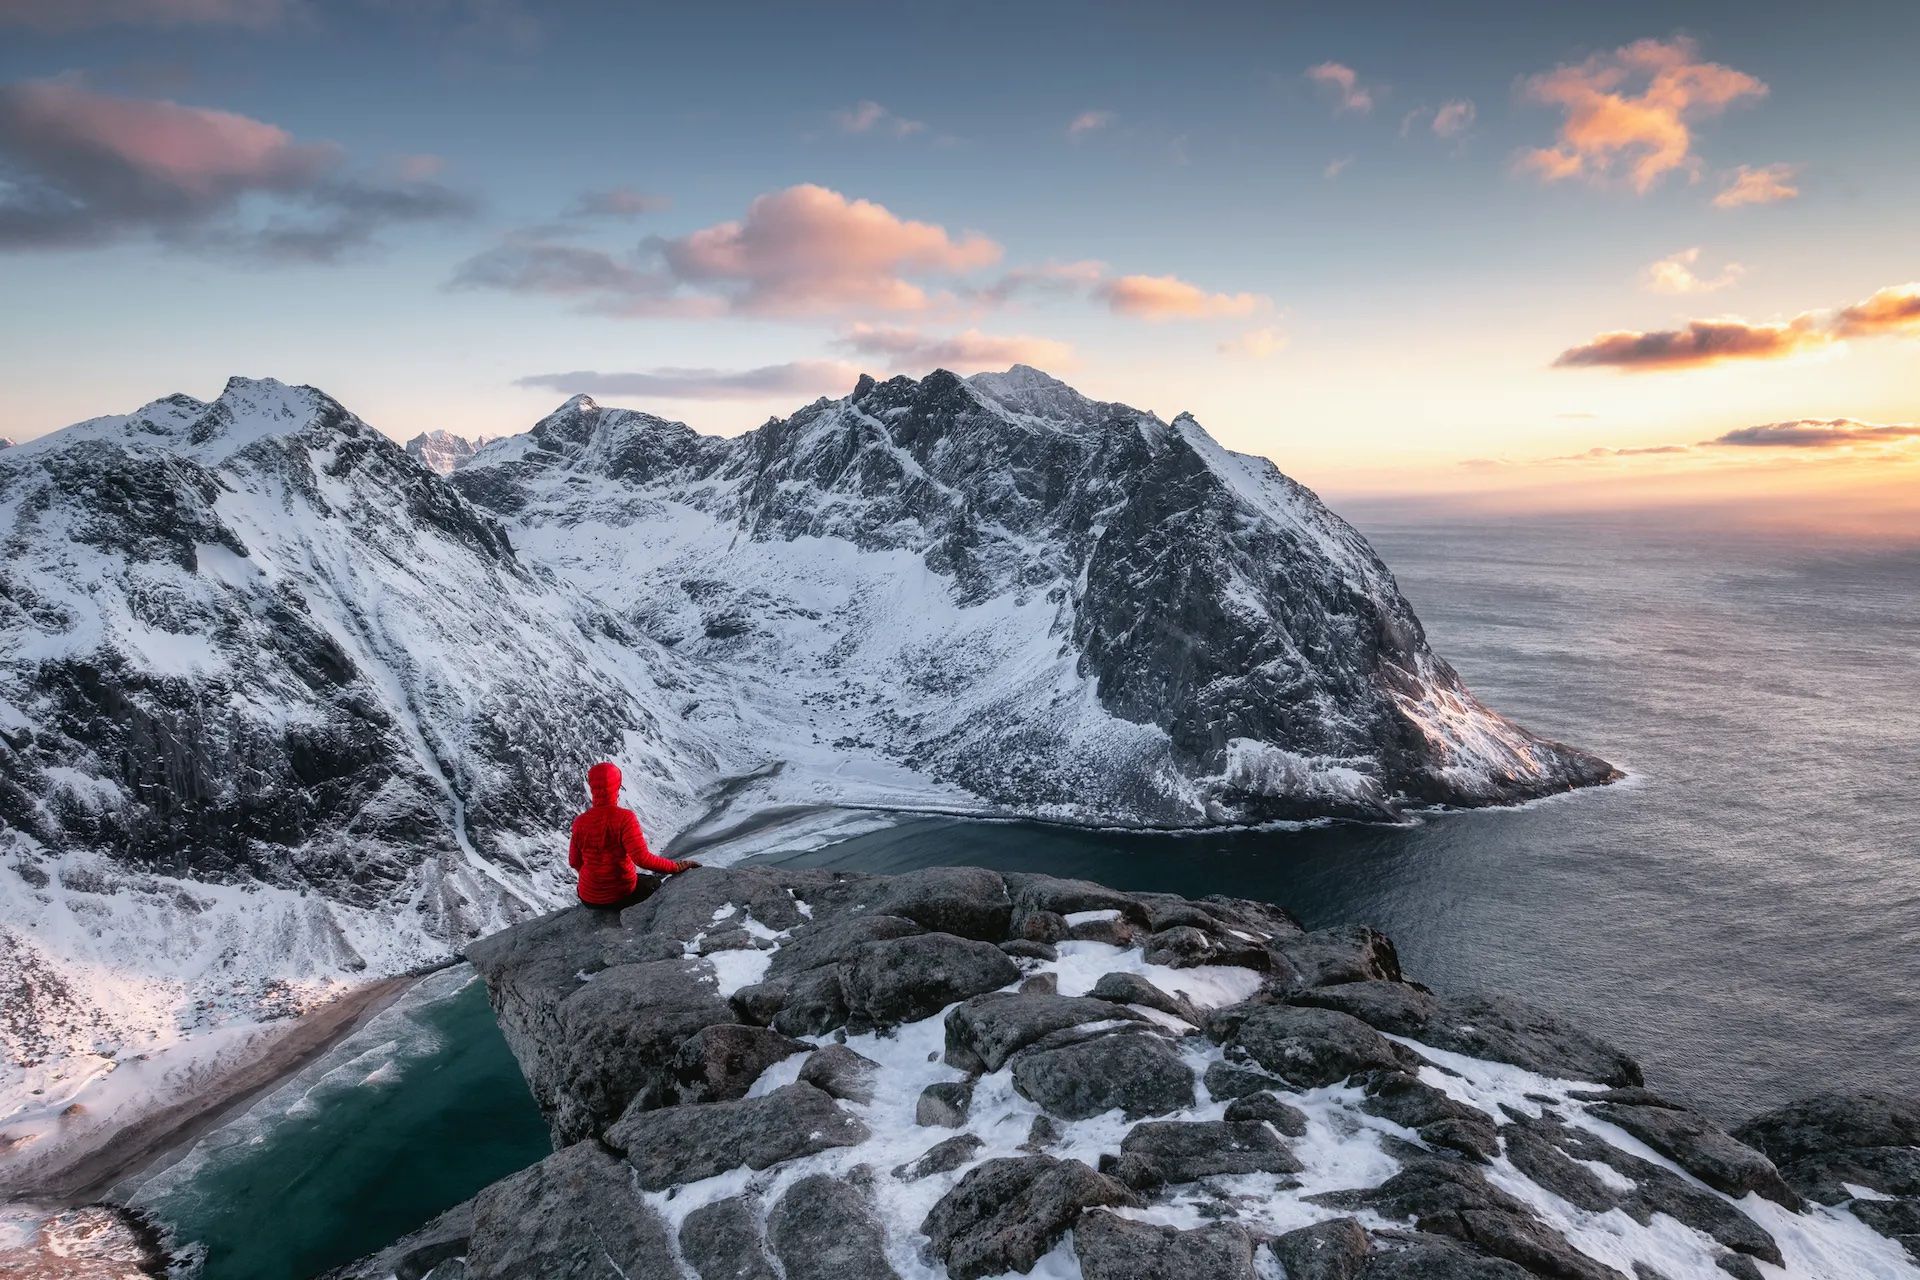 The view from Ryten over Kvlavika Beach, during winter, on the Lofoten Islands. Photo: Getty.